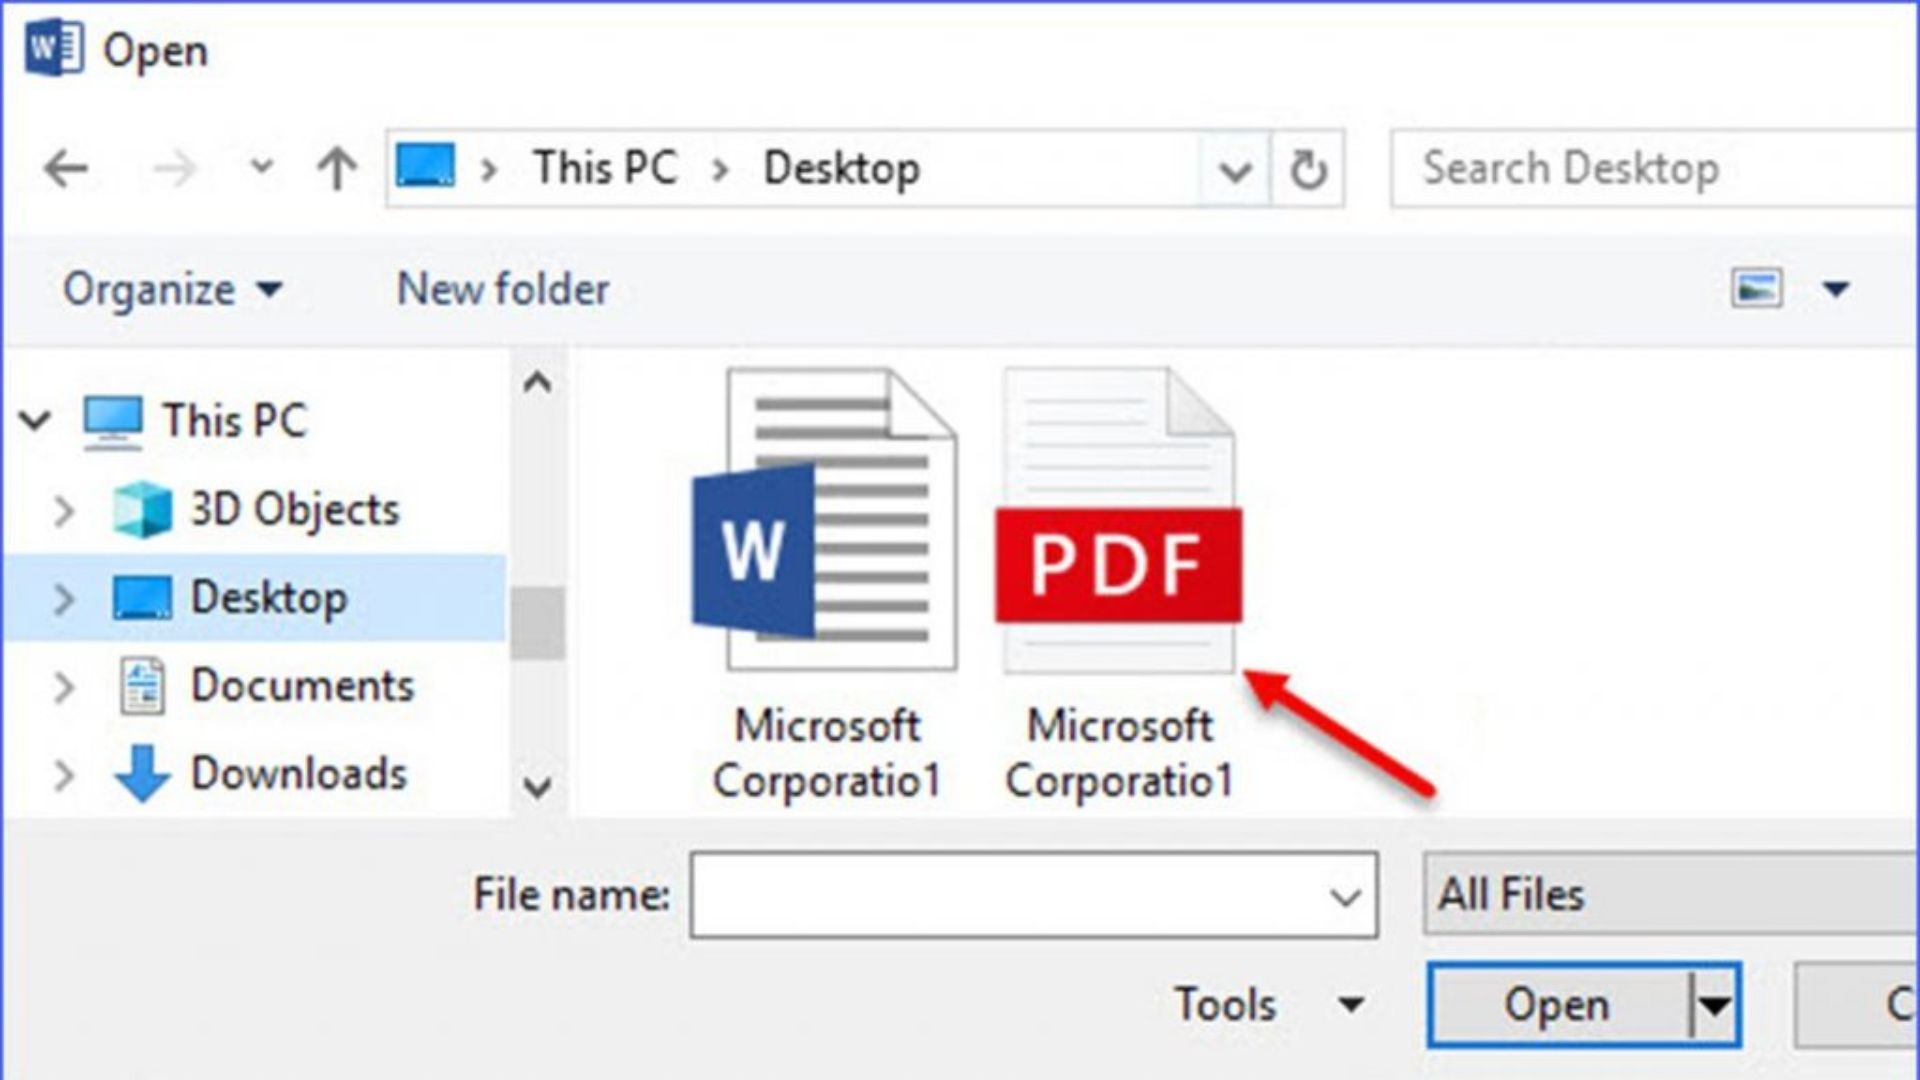 pdi-file-what-it-is-and-how-to-open-one